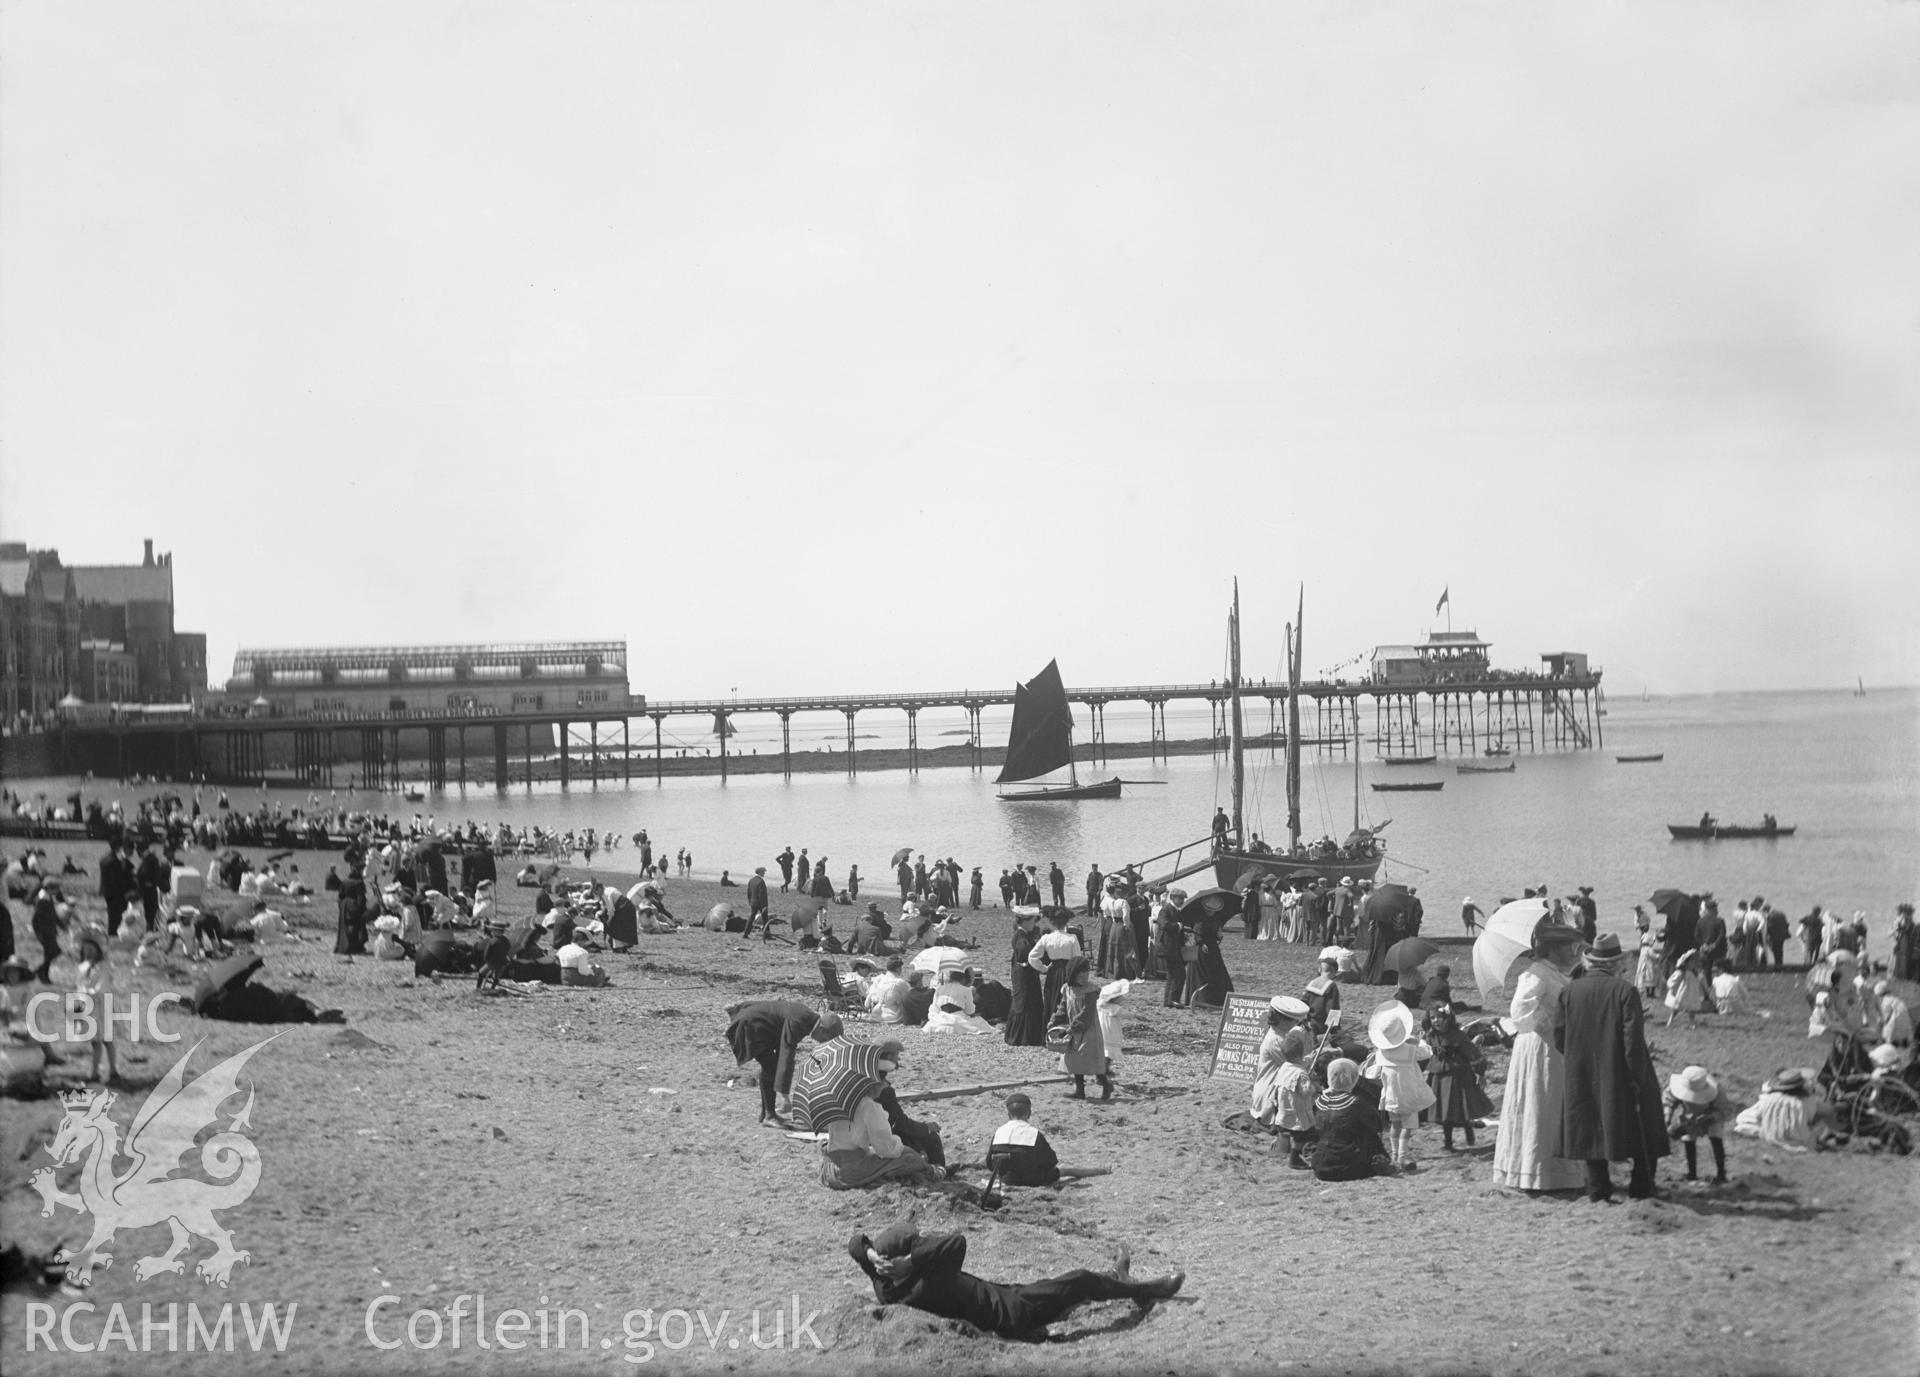 Black and white image dating from c.1910 showing the a busy beach scene at Aberystwyth with the Pier in the background.